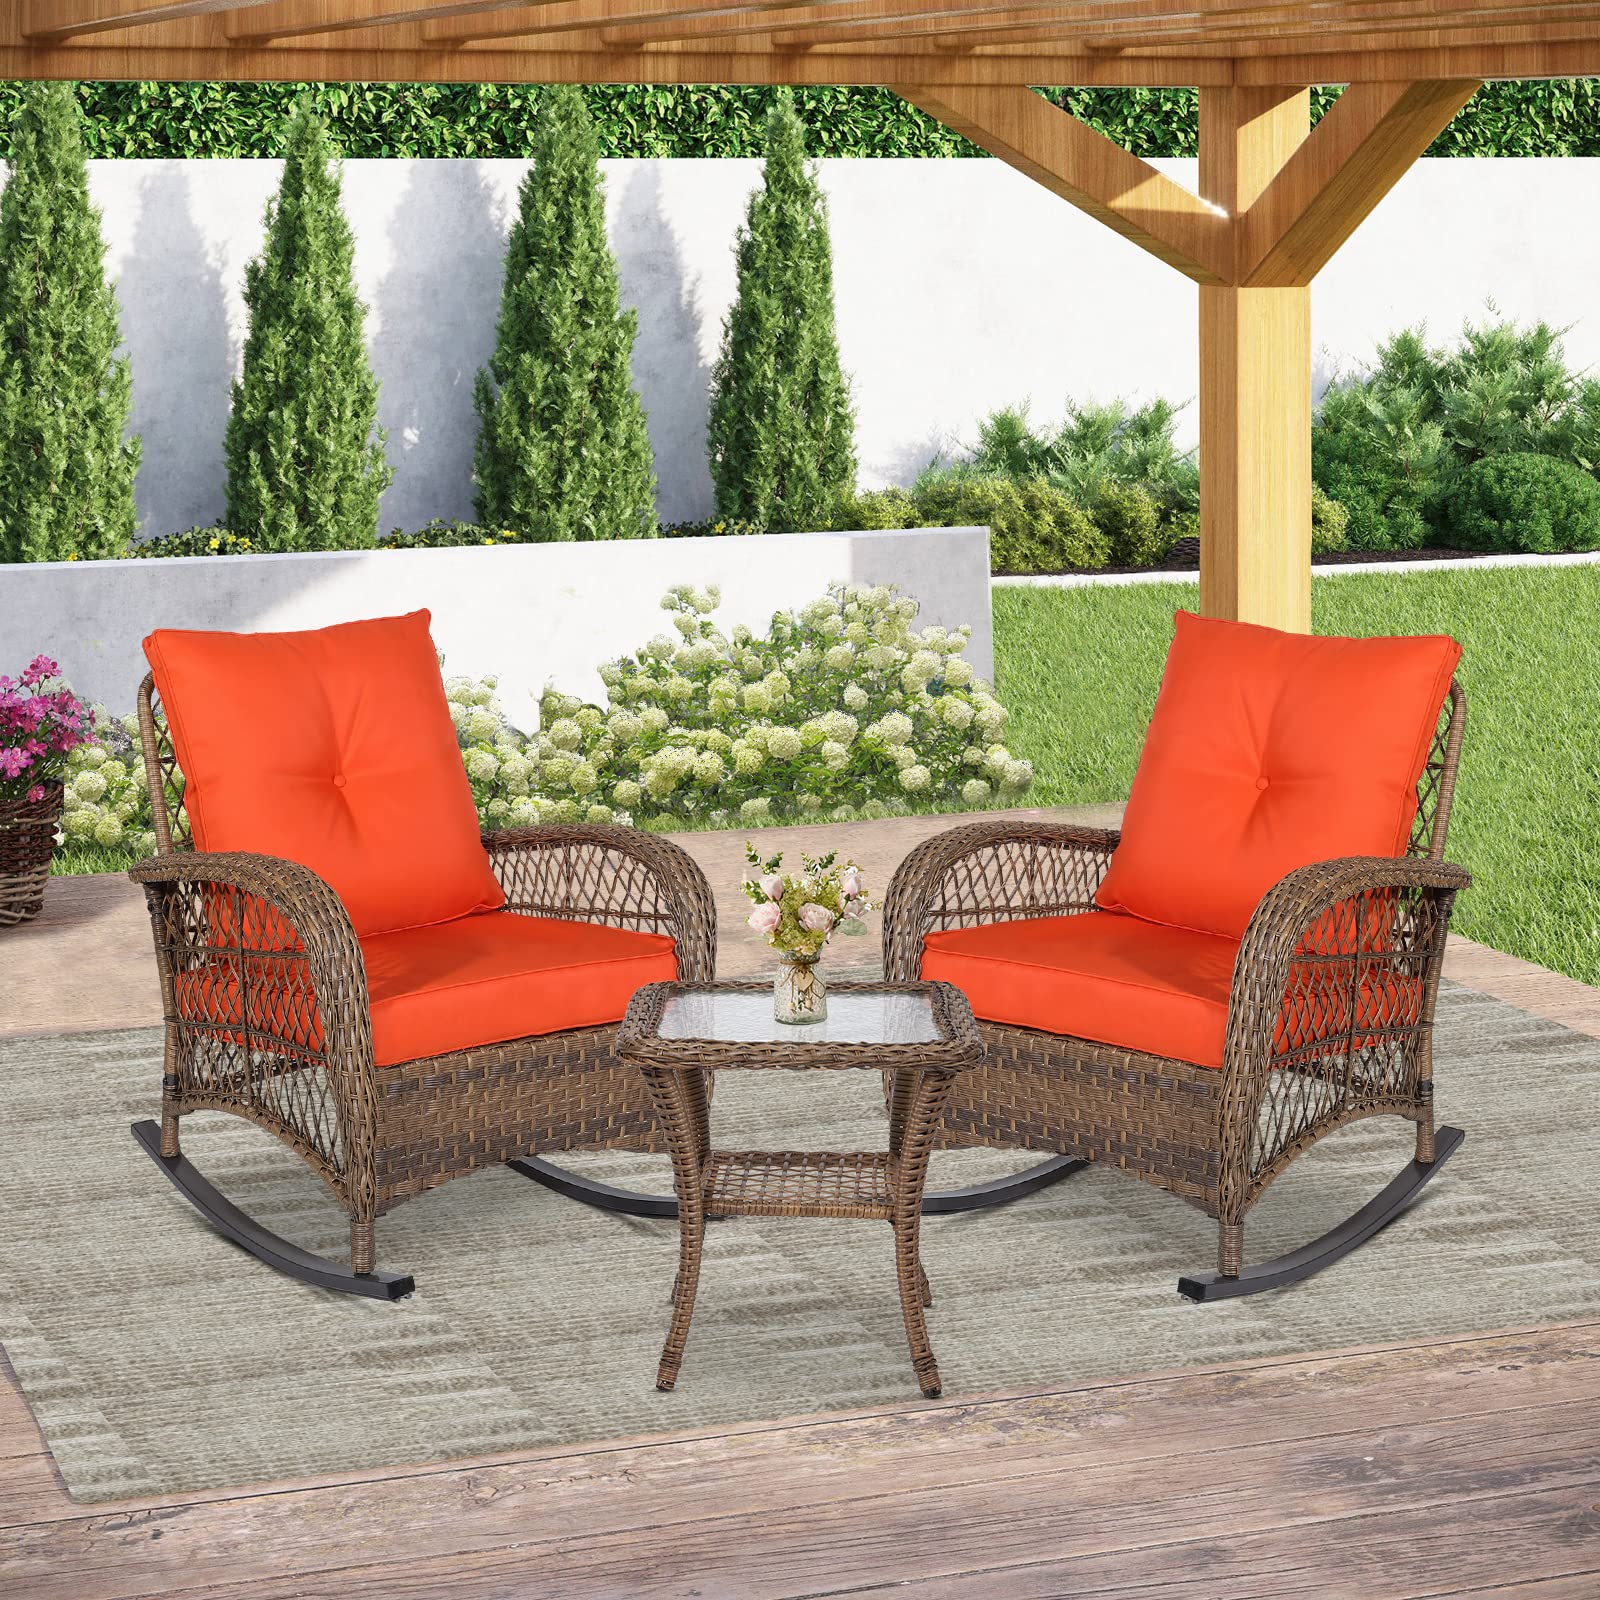 SOCIALCOMFY 3-Piece Outdoor Wicker Rocking Chair Set, Patio Bistro Conversation Sets with Cushions and Glass-Top Coffee Table, Rattan Furniture Sets for Porch & Backyard, Orange - image 5 of 7